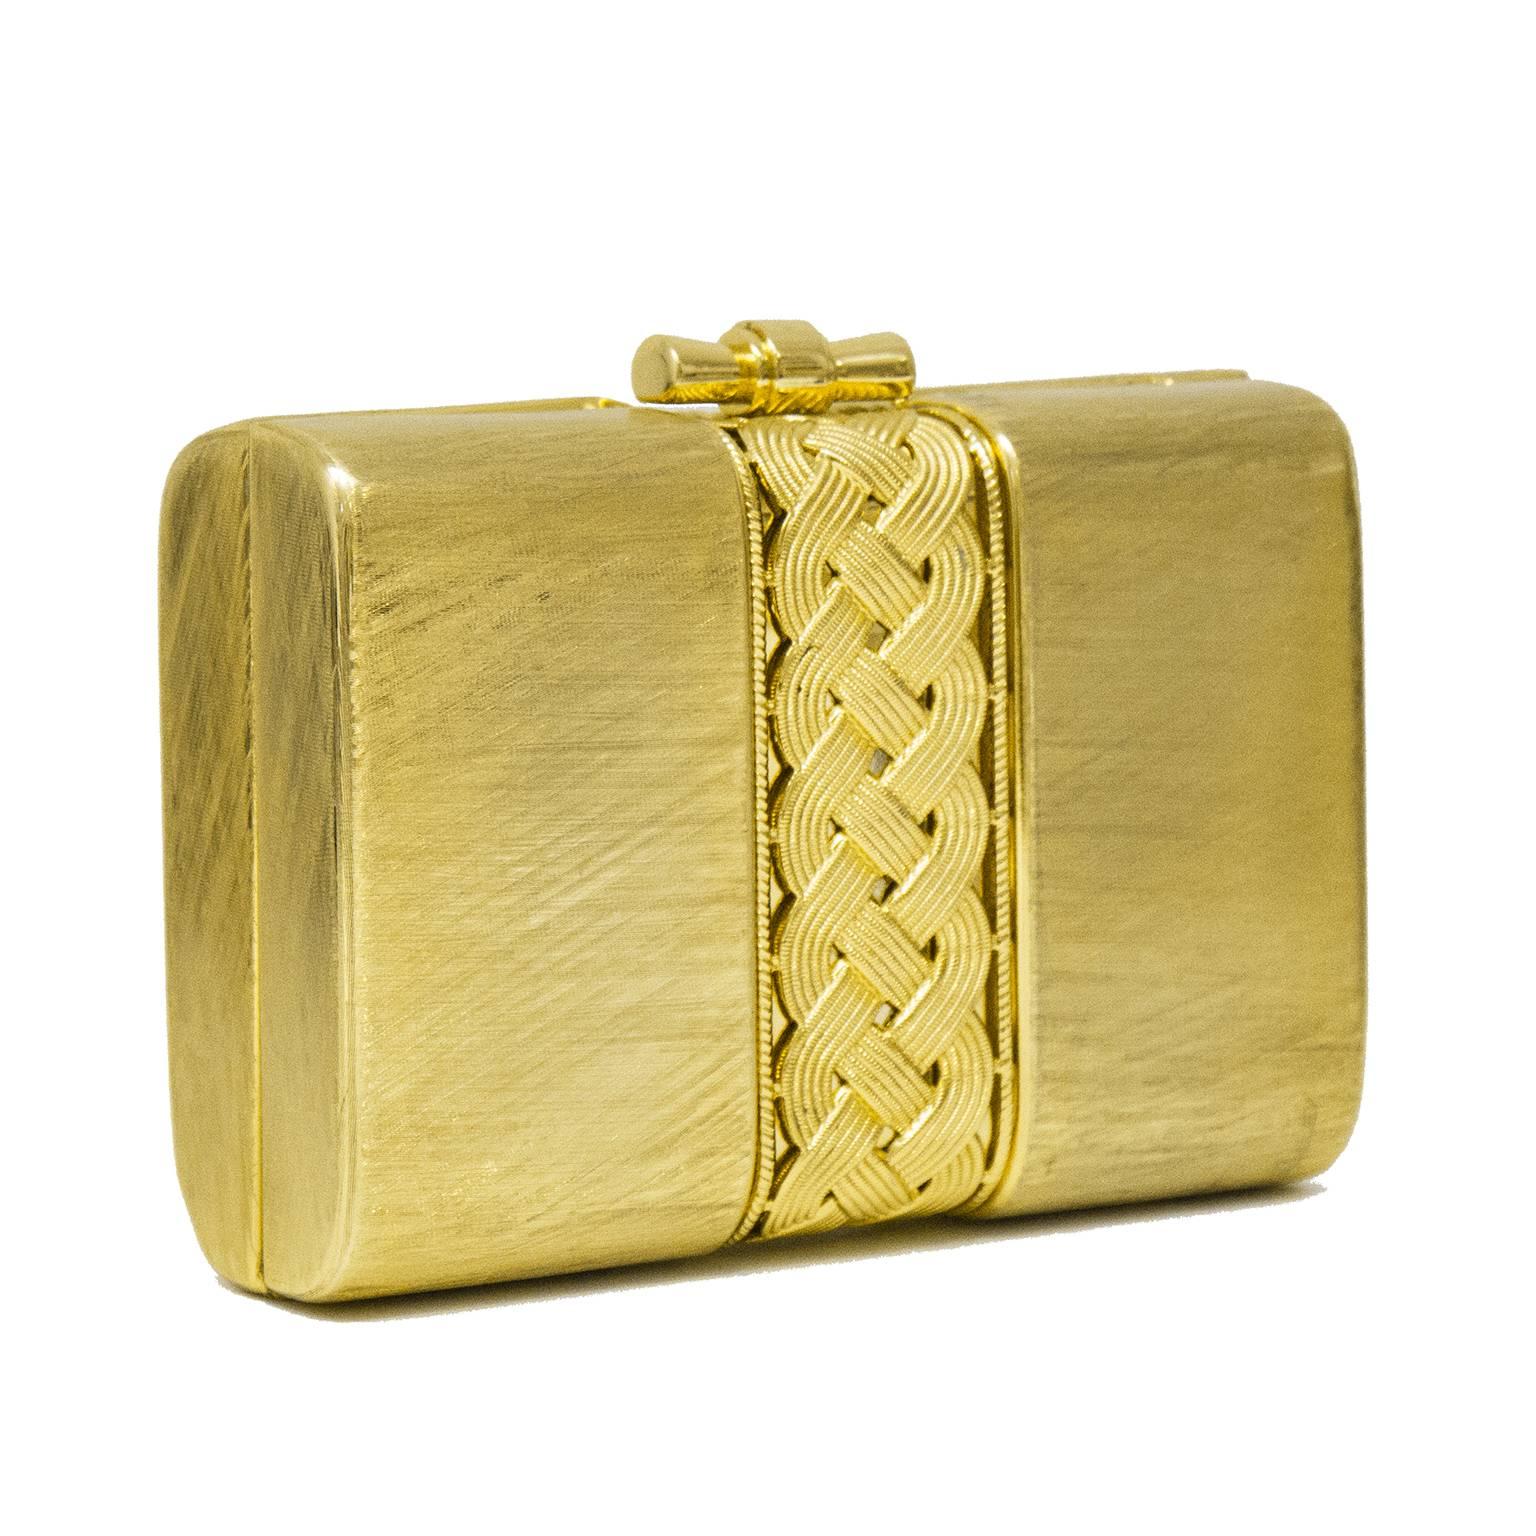 1980's Rodo brushed gold tone metal evening clutch. Rectangular, with interlocking braided detail in center. Minor wear to exterior. Clean gold leather interior with small pocket. 23